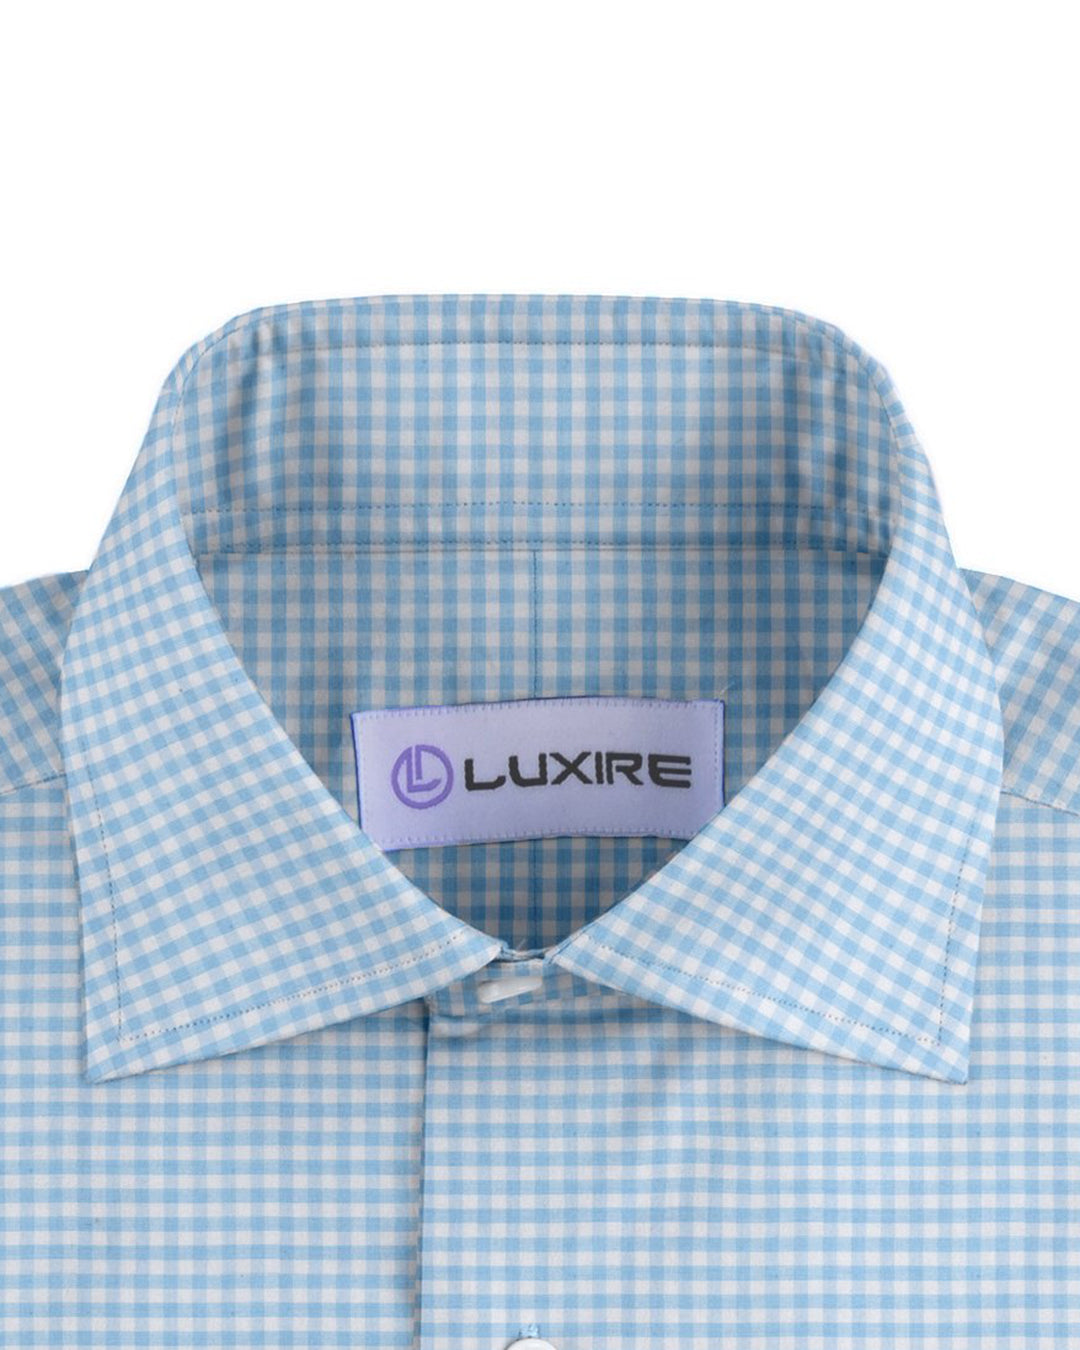 Front close view of custom check shirts for men by Luxire light blue gingham